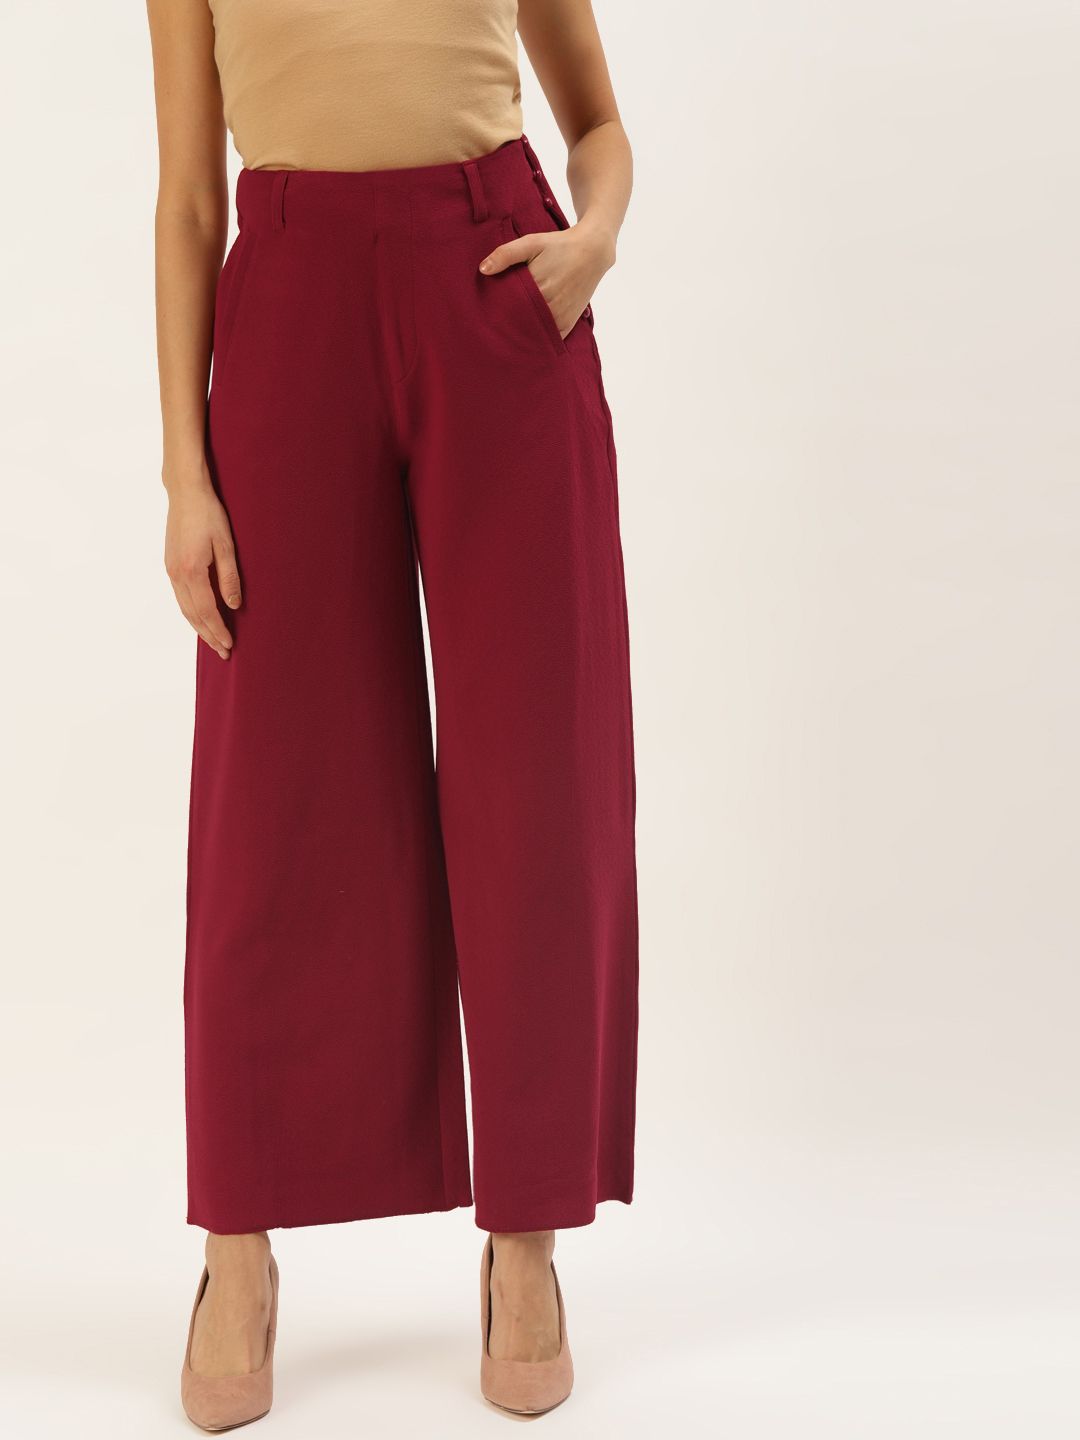 Zastraa Women Red Solid Flared Culottes Trousers Price in India